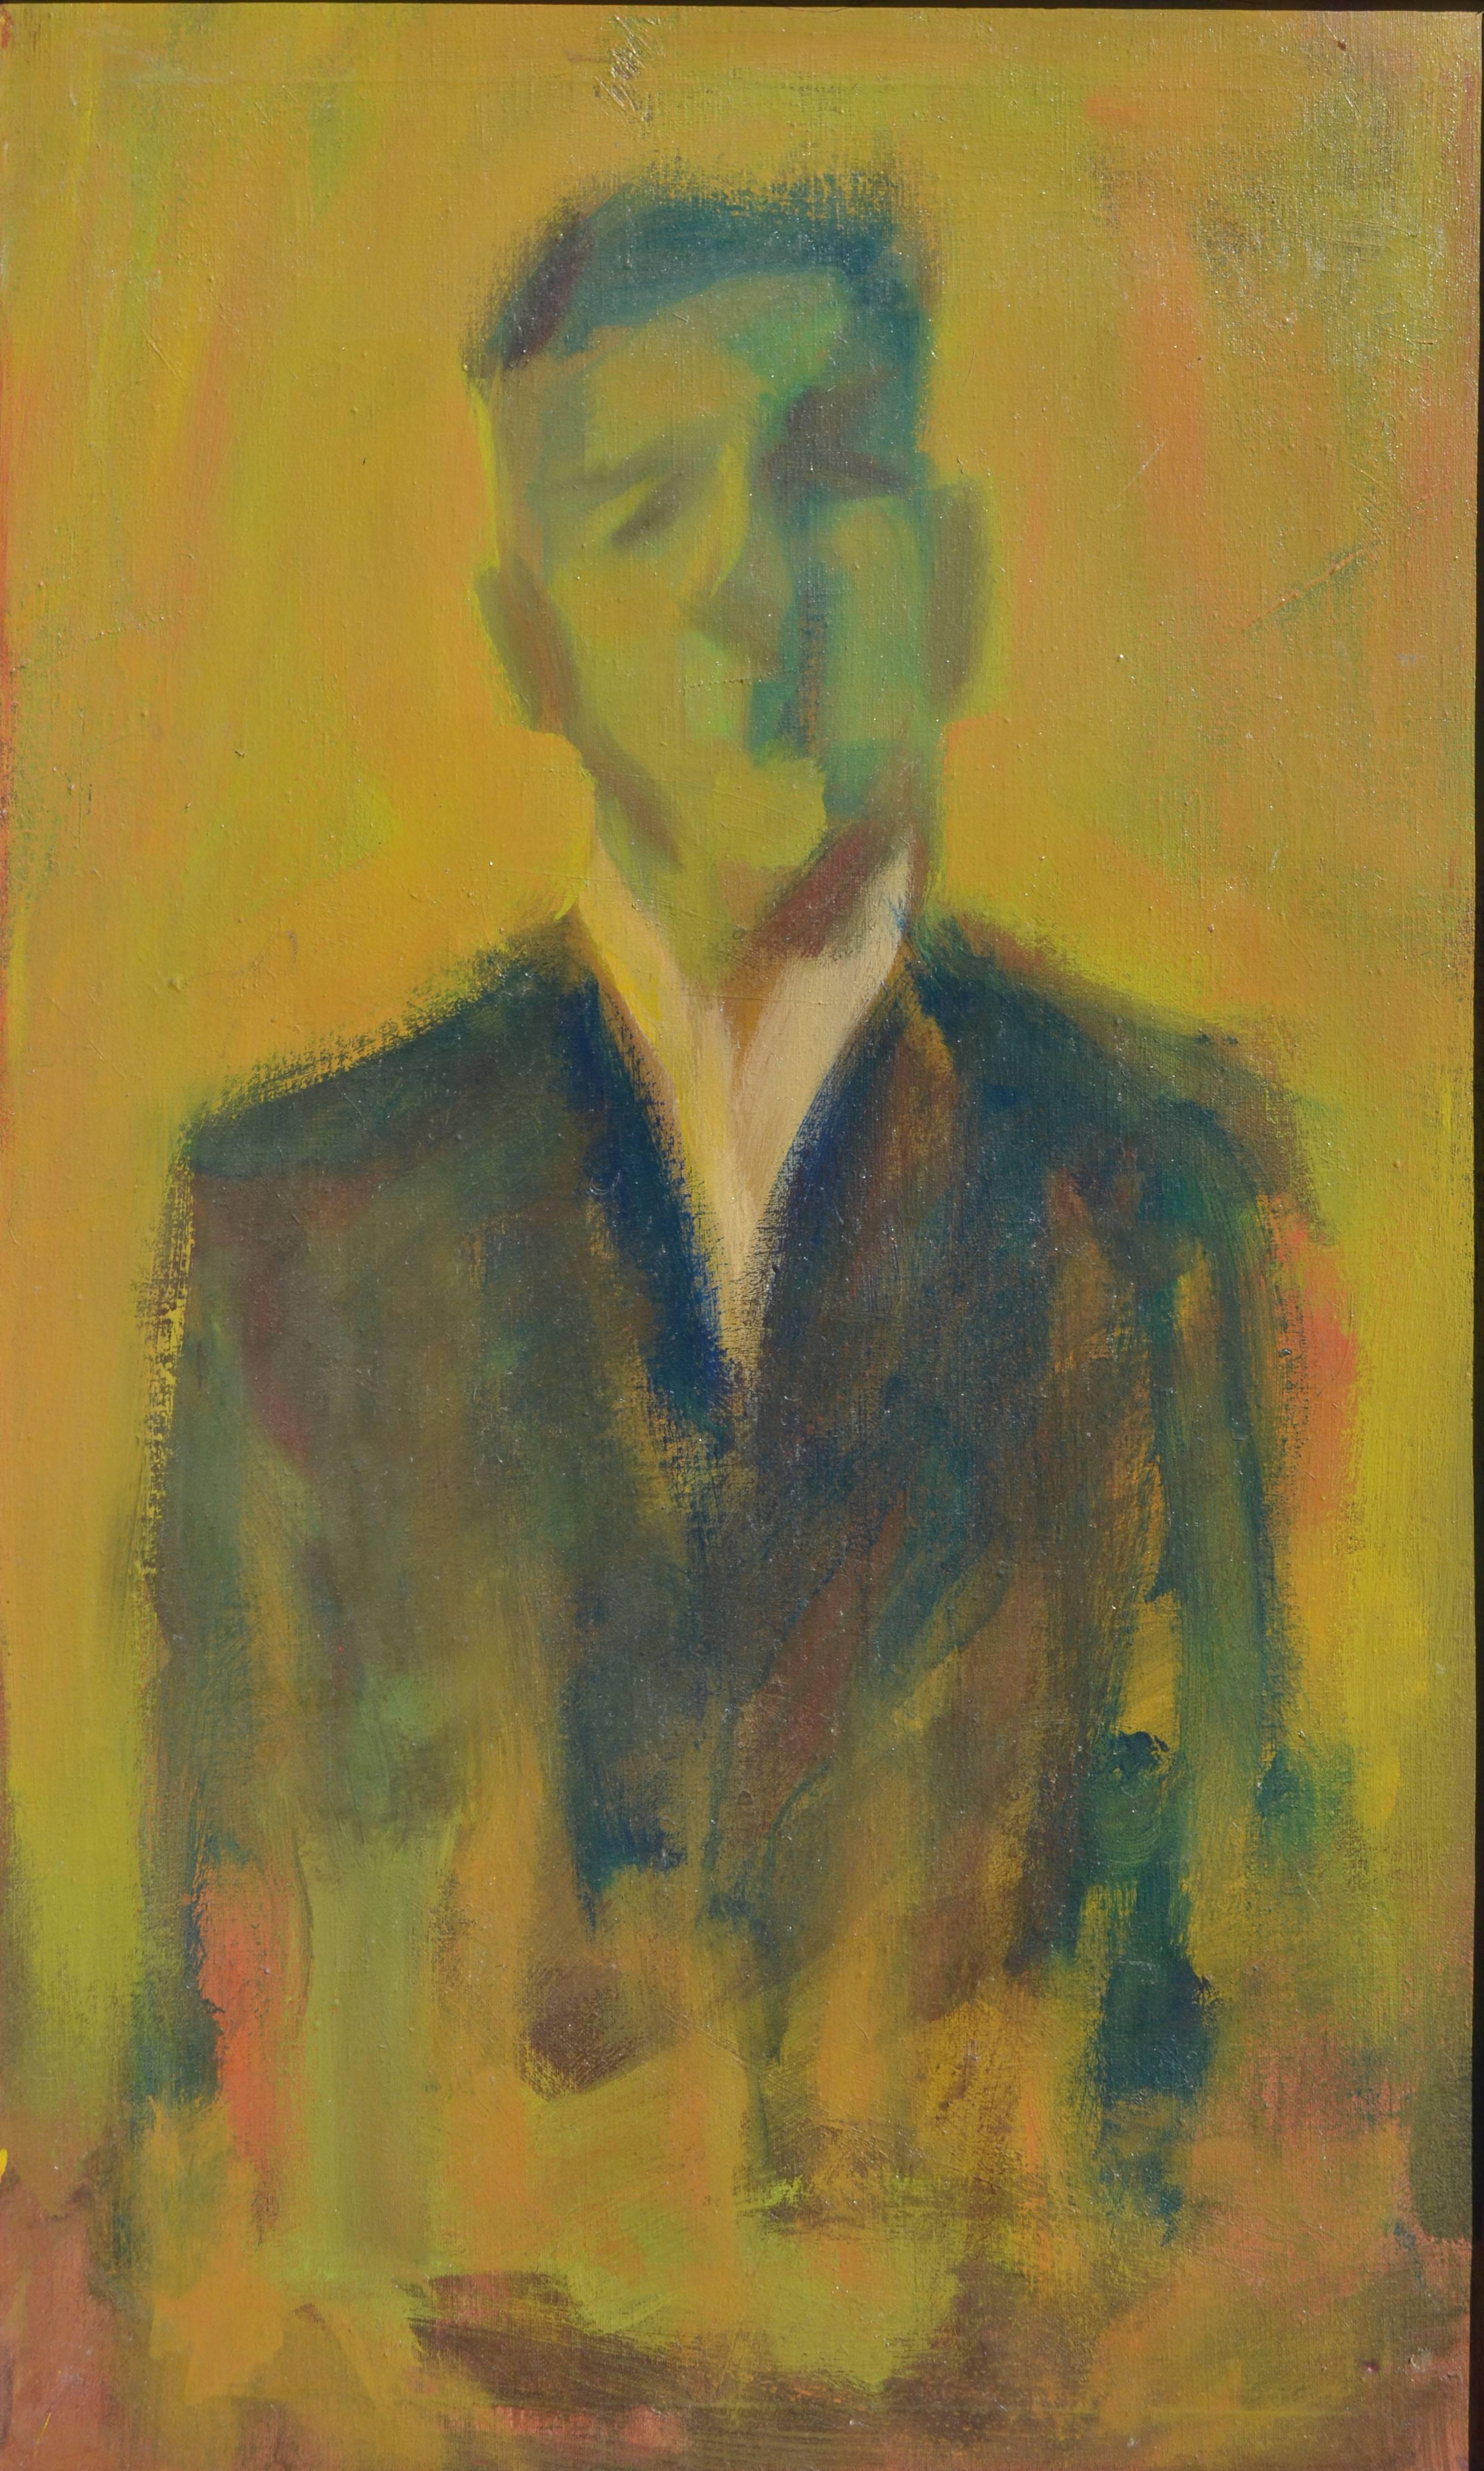 MidCentury Modern Large-Scale Abstracted Man, Bay Area Figurative Movement - Painting by Unknown